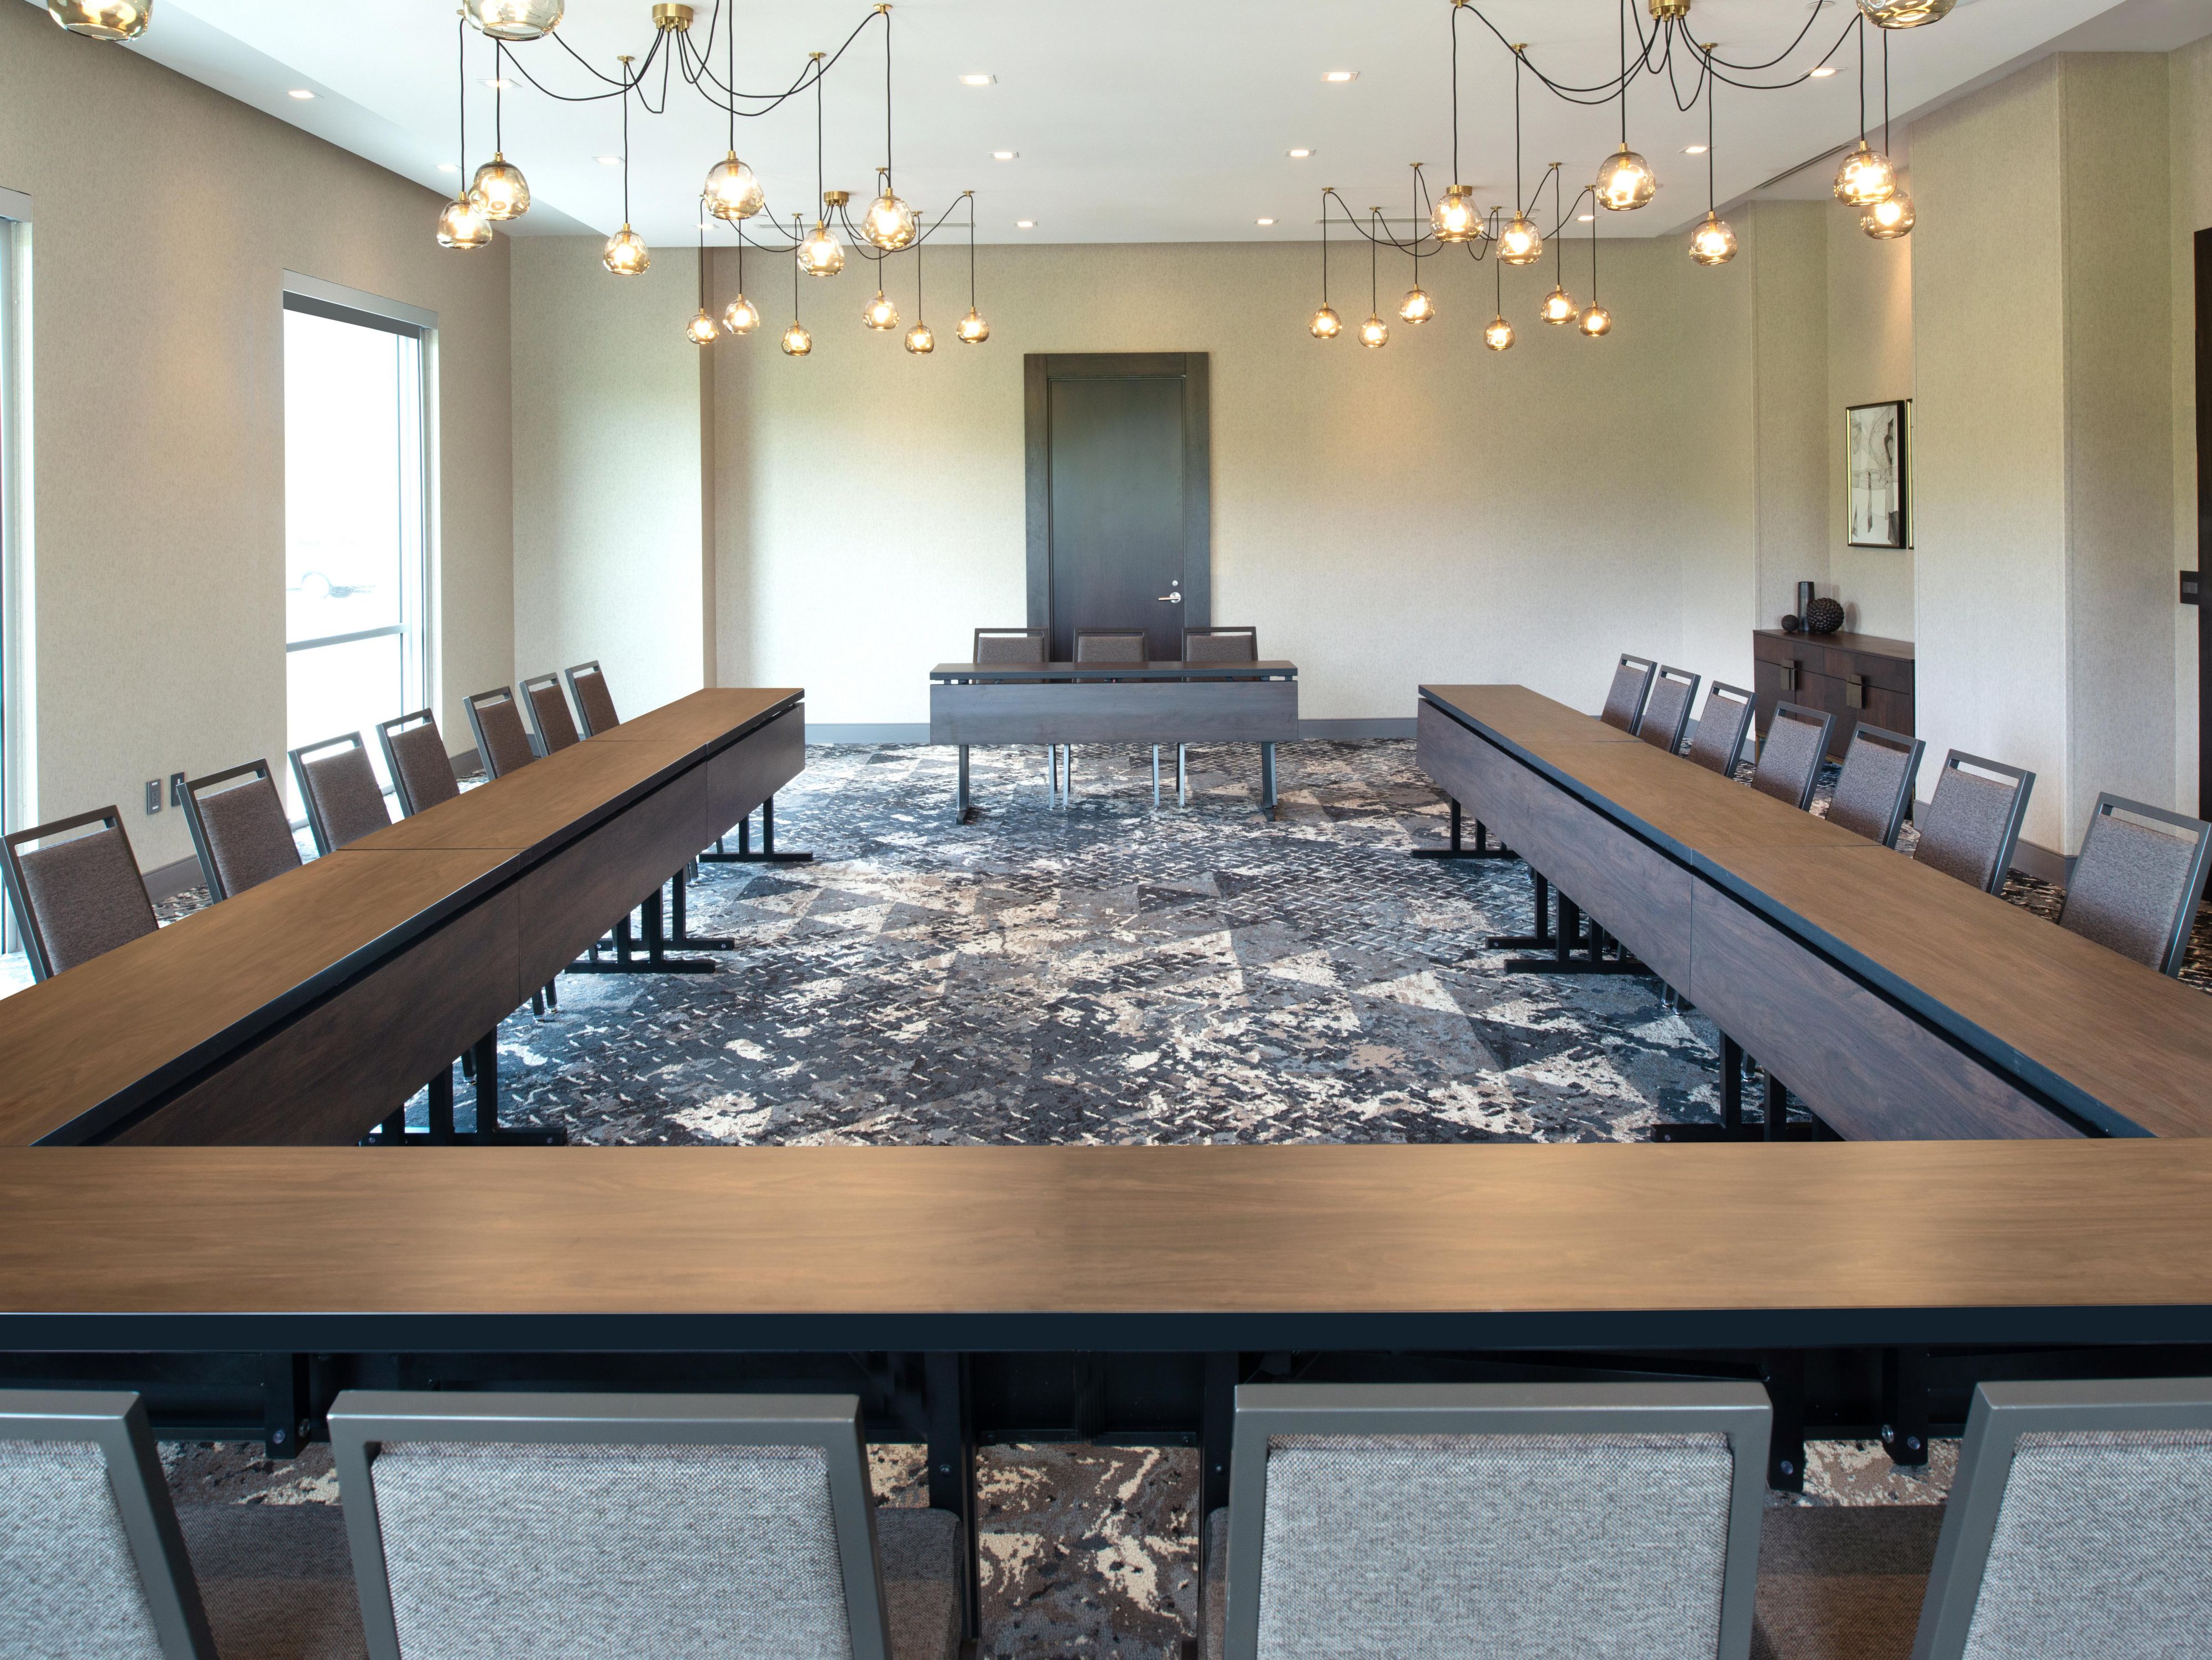 1100 sq ft of meeting space. Call today for room rental details.